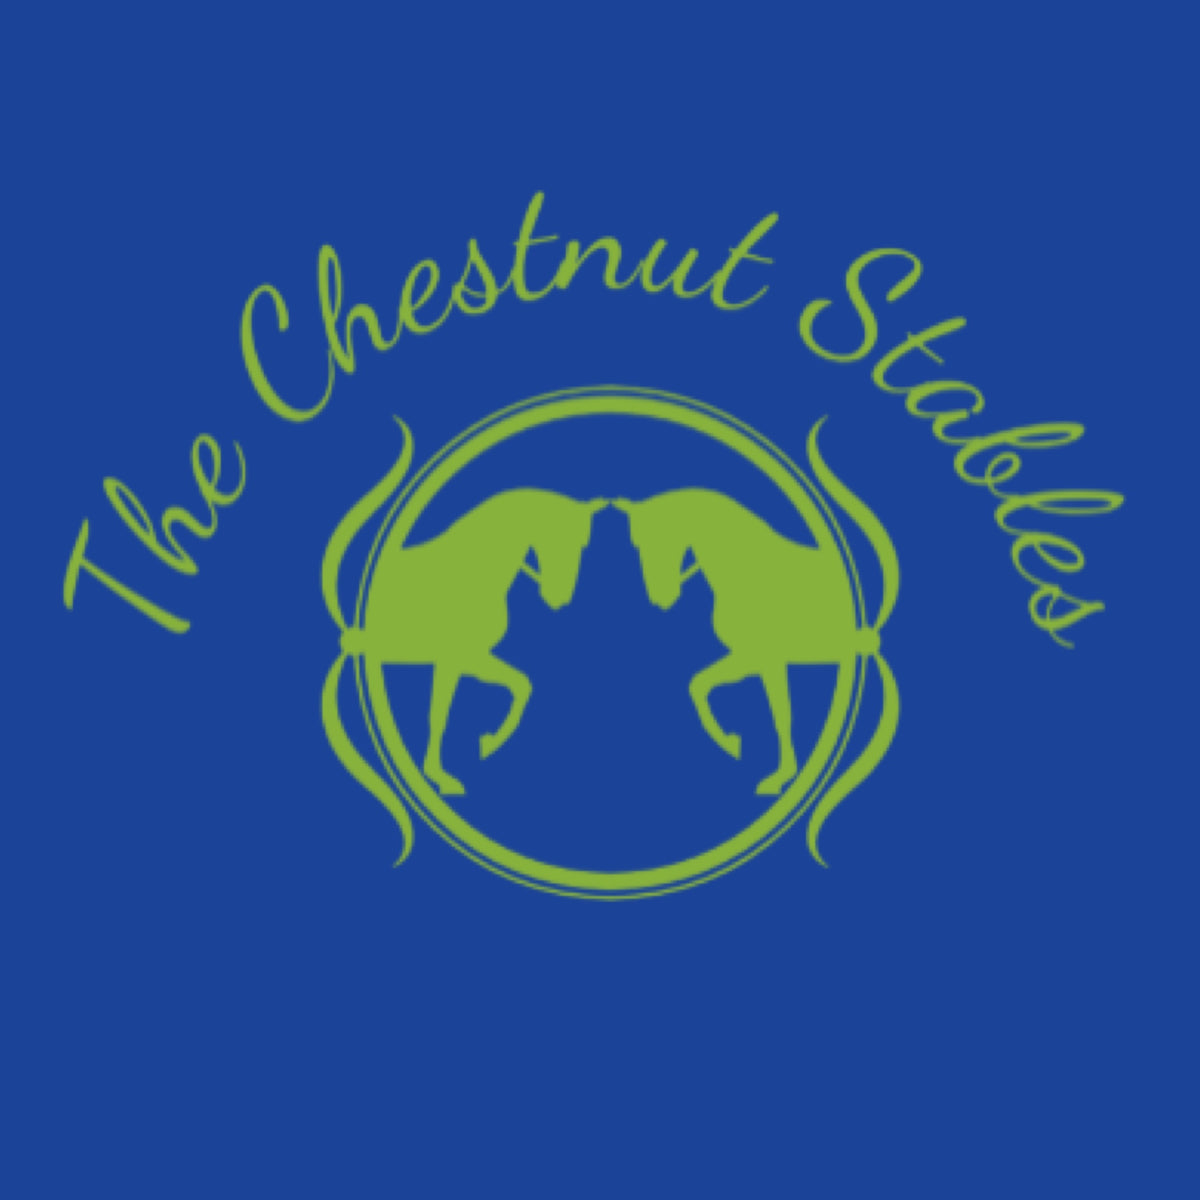 The Chestnut Stables